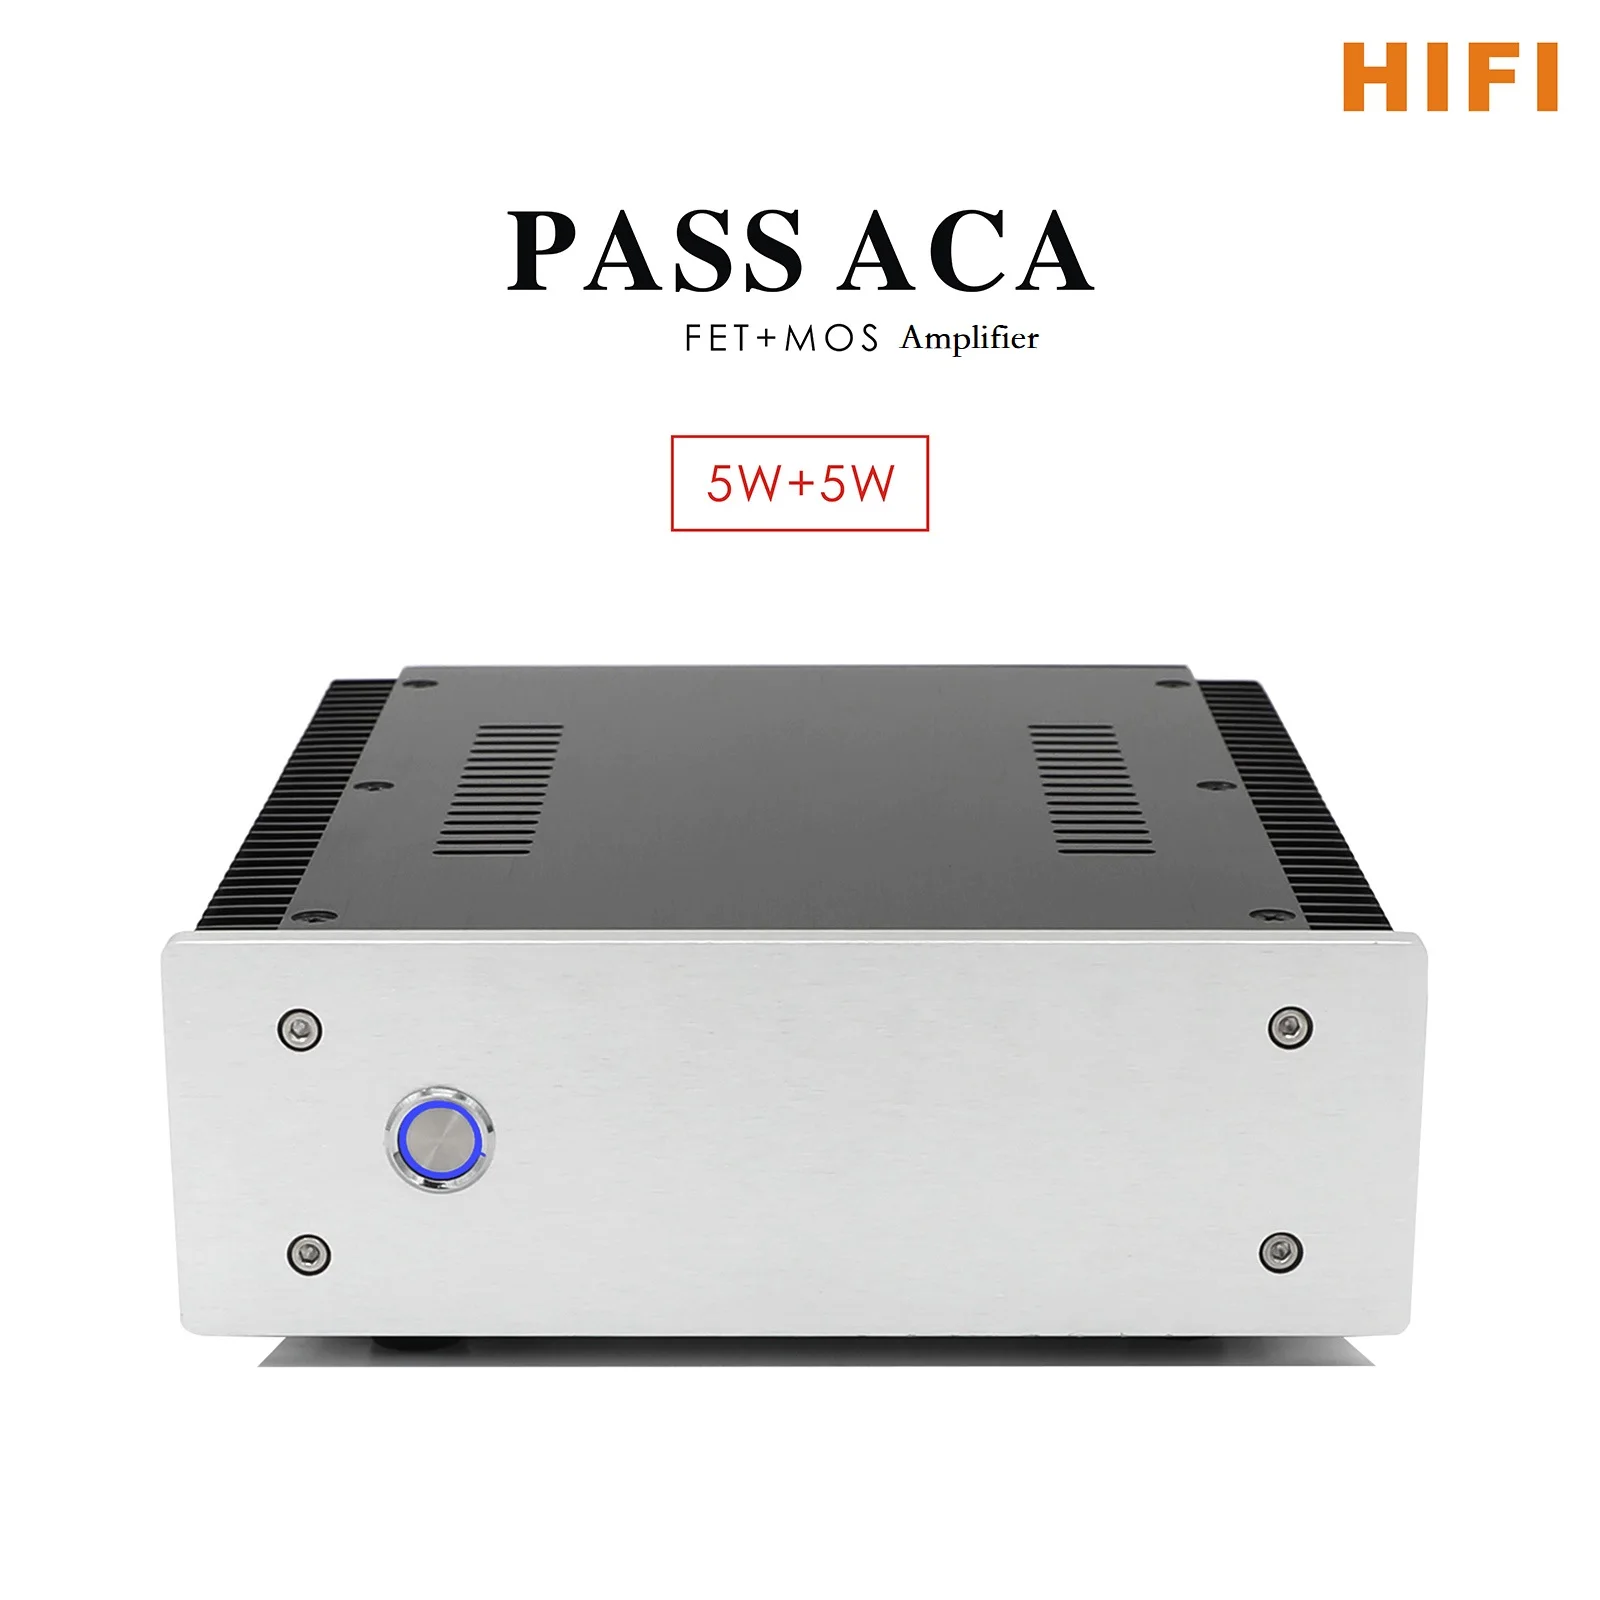 

HIFI PASS ACA Stereo single-Ended 5W+5W Class A FET+MOS Power Amplifier